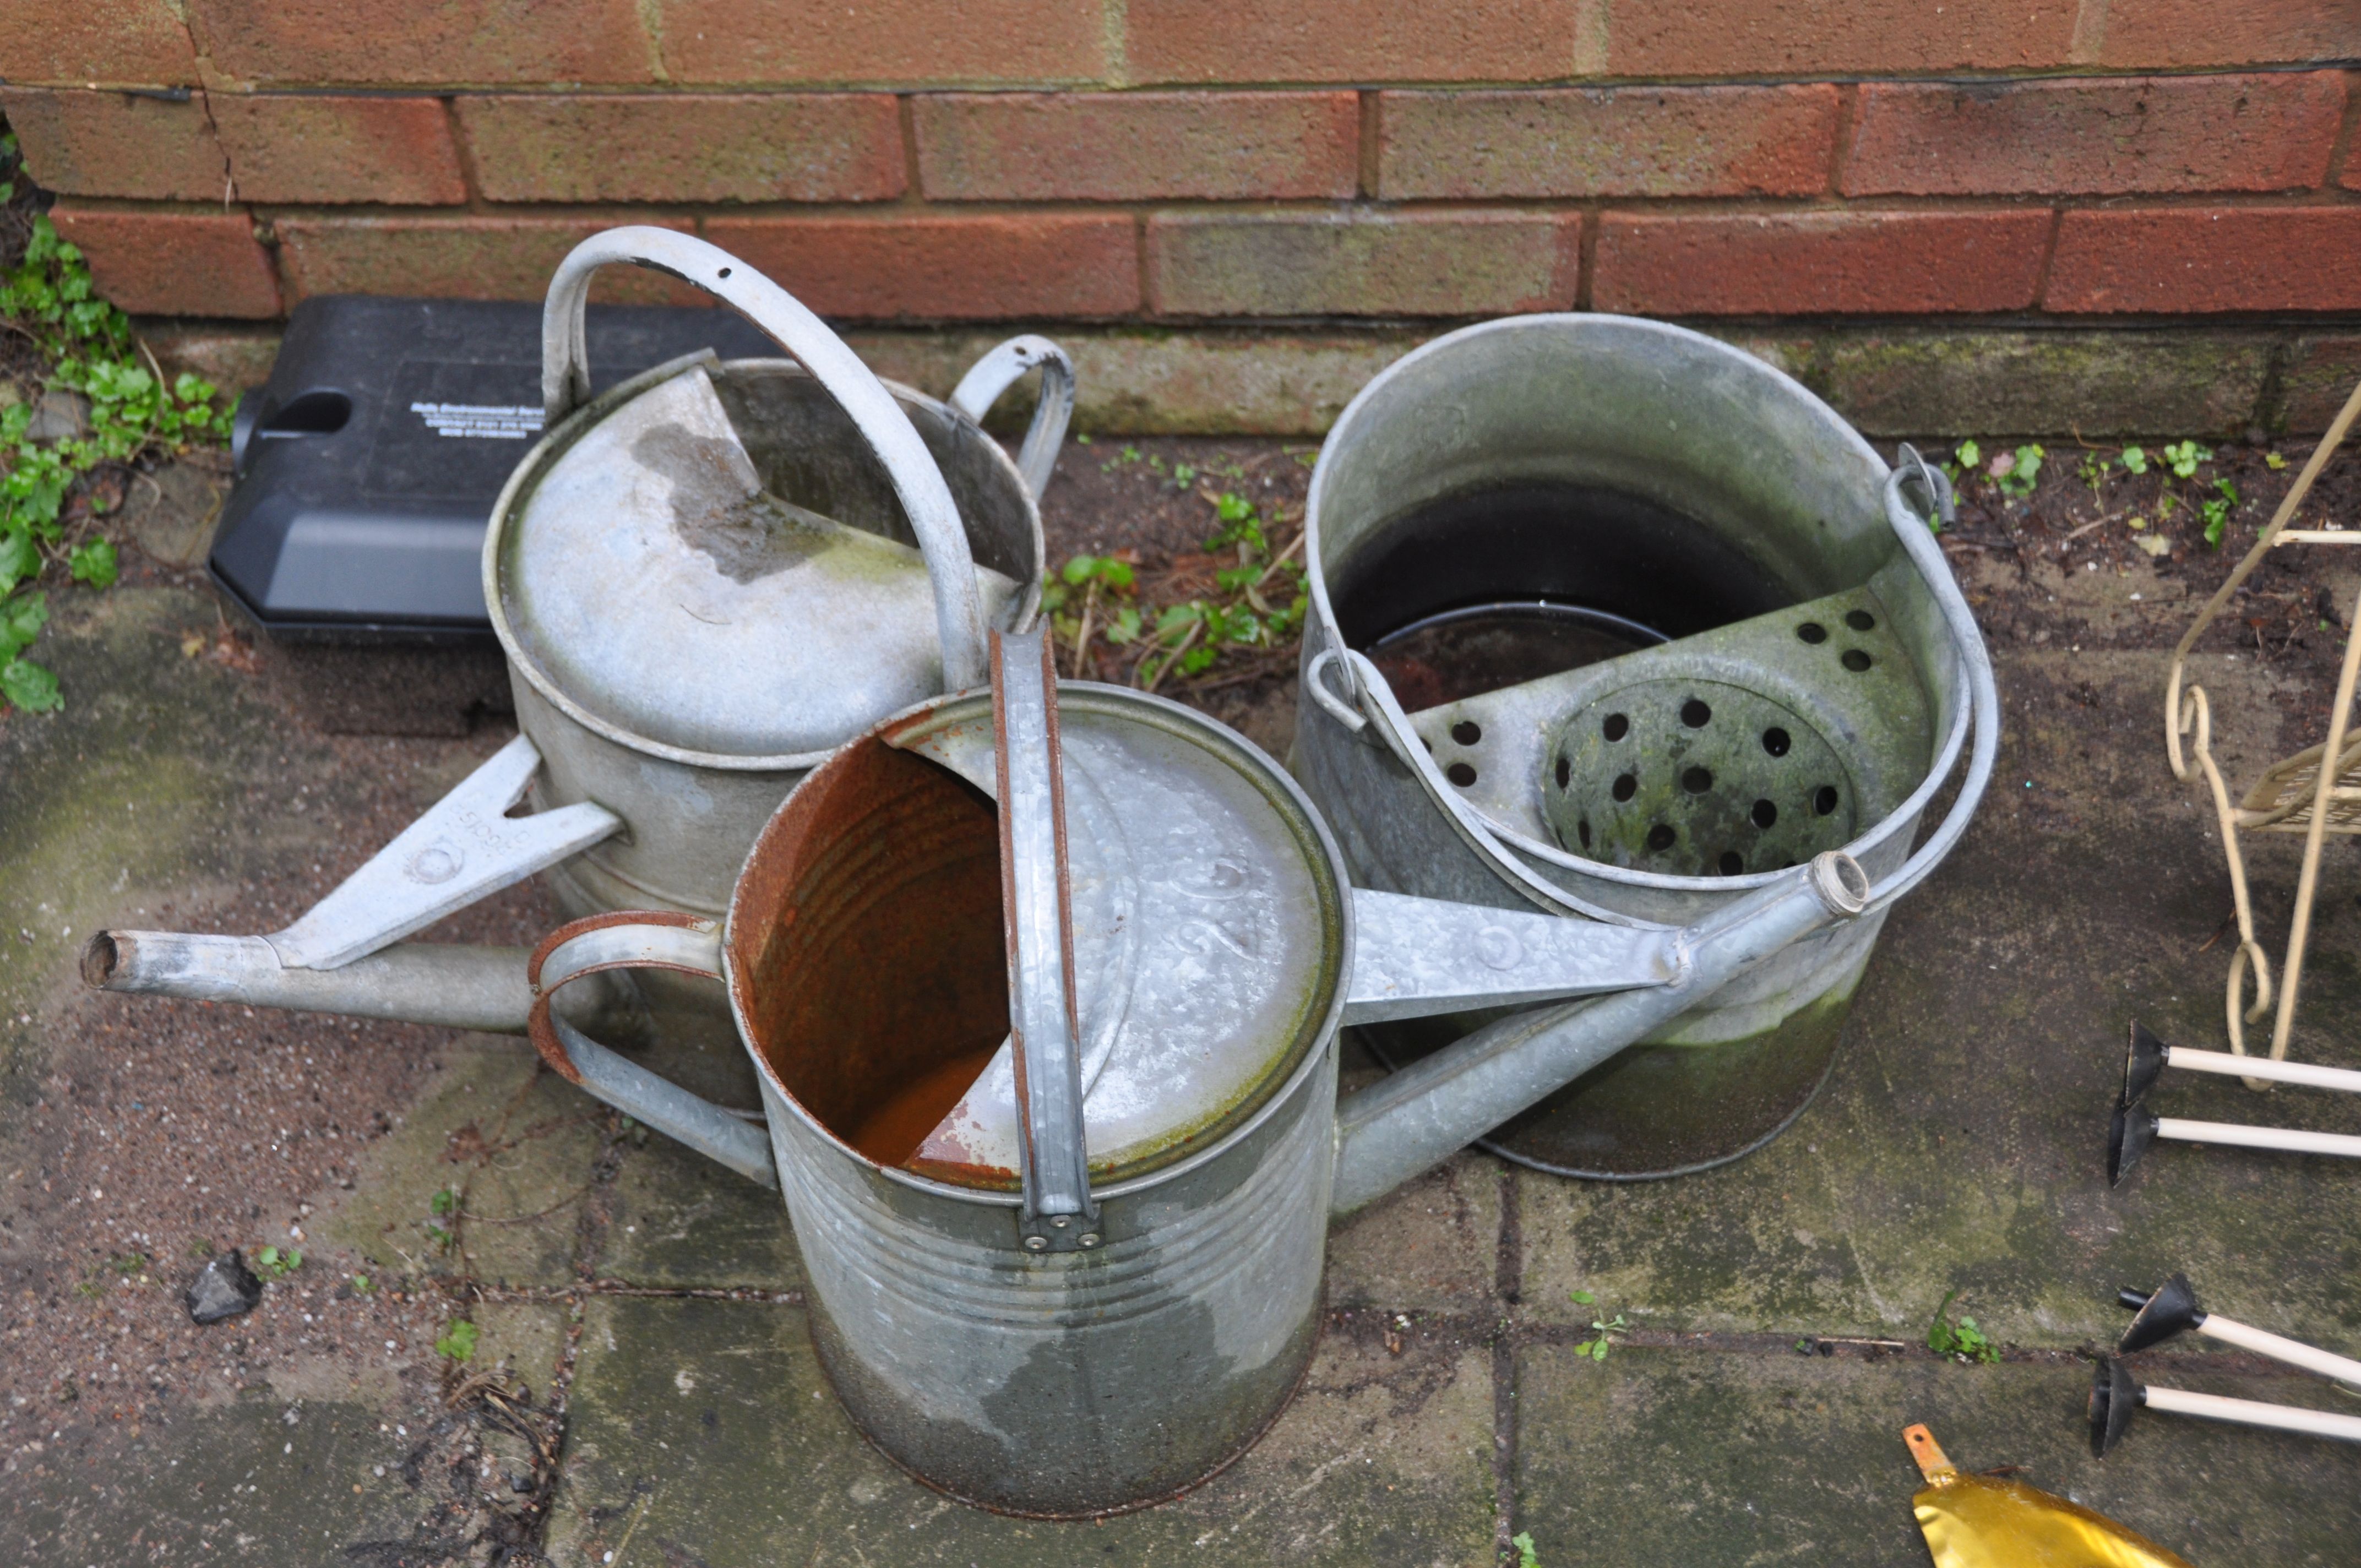 A SELECTION OF METAL GARDEN ORNAMENTS, vintage galvanised buckets and watering cans, a pair of - Image 4 of 5